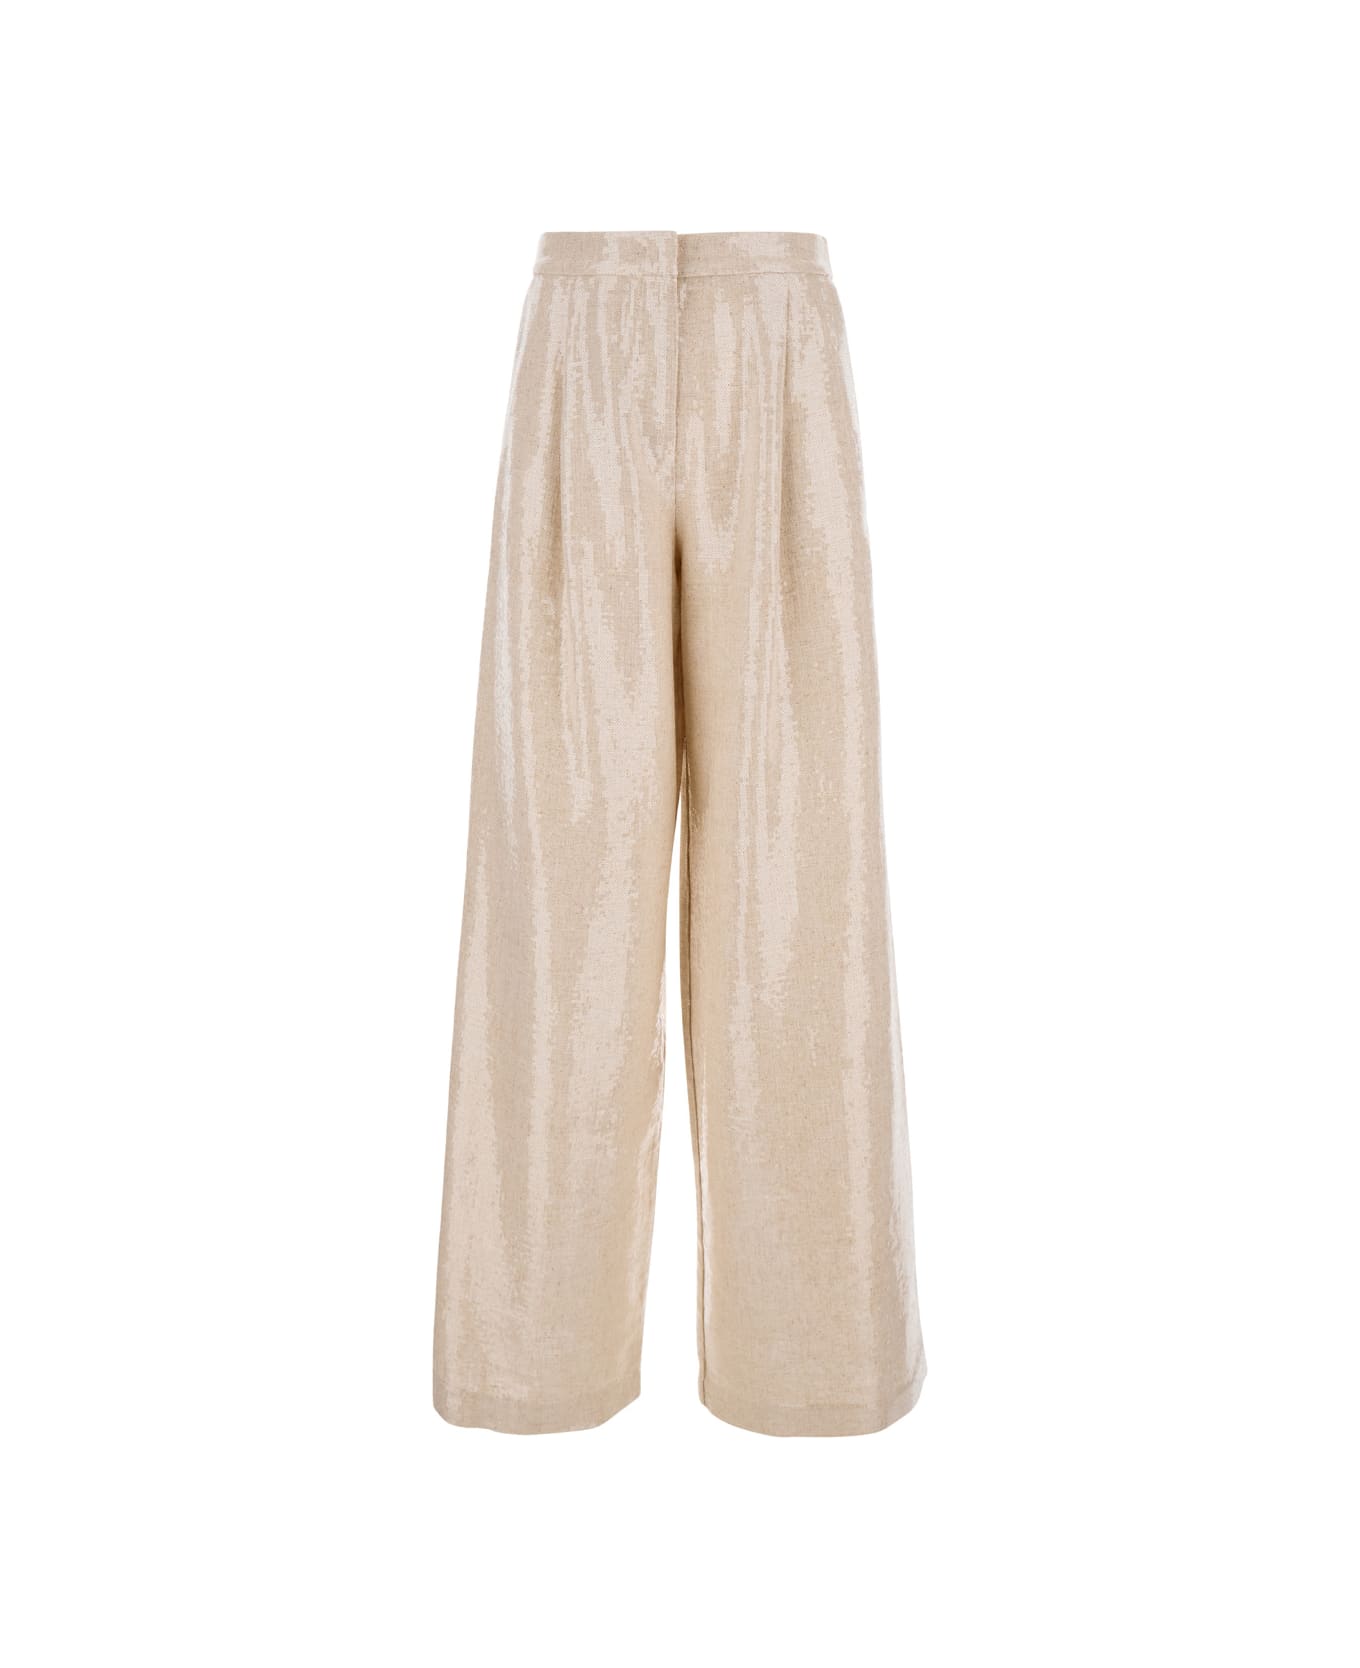 Federica Tosi Pink Trousers With Sequins In Linen Blend Woman - Beige